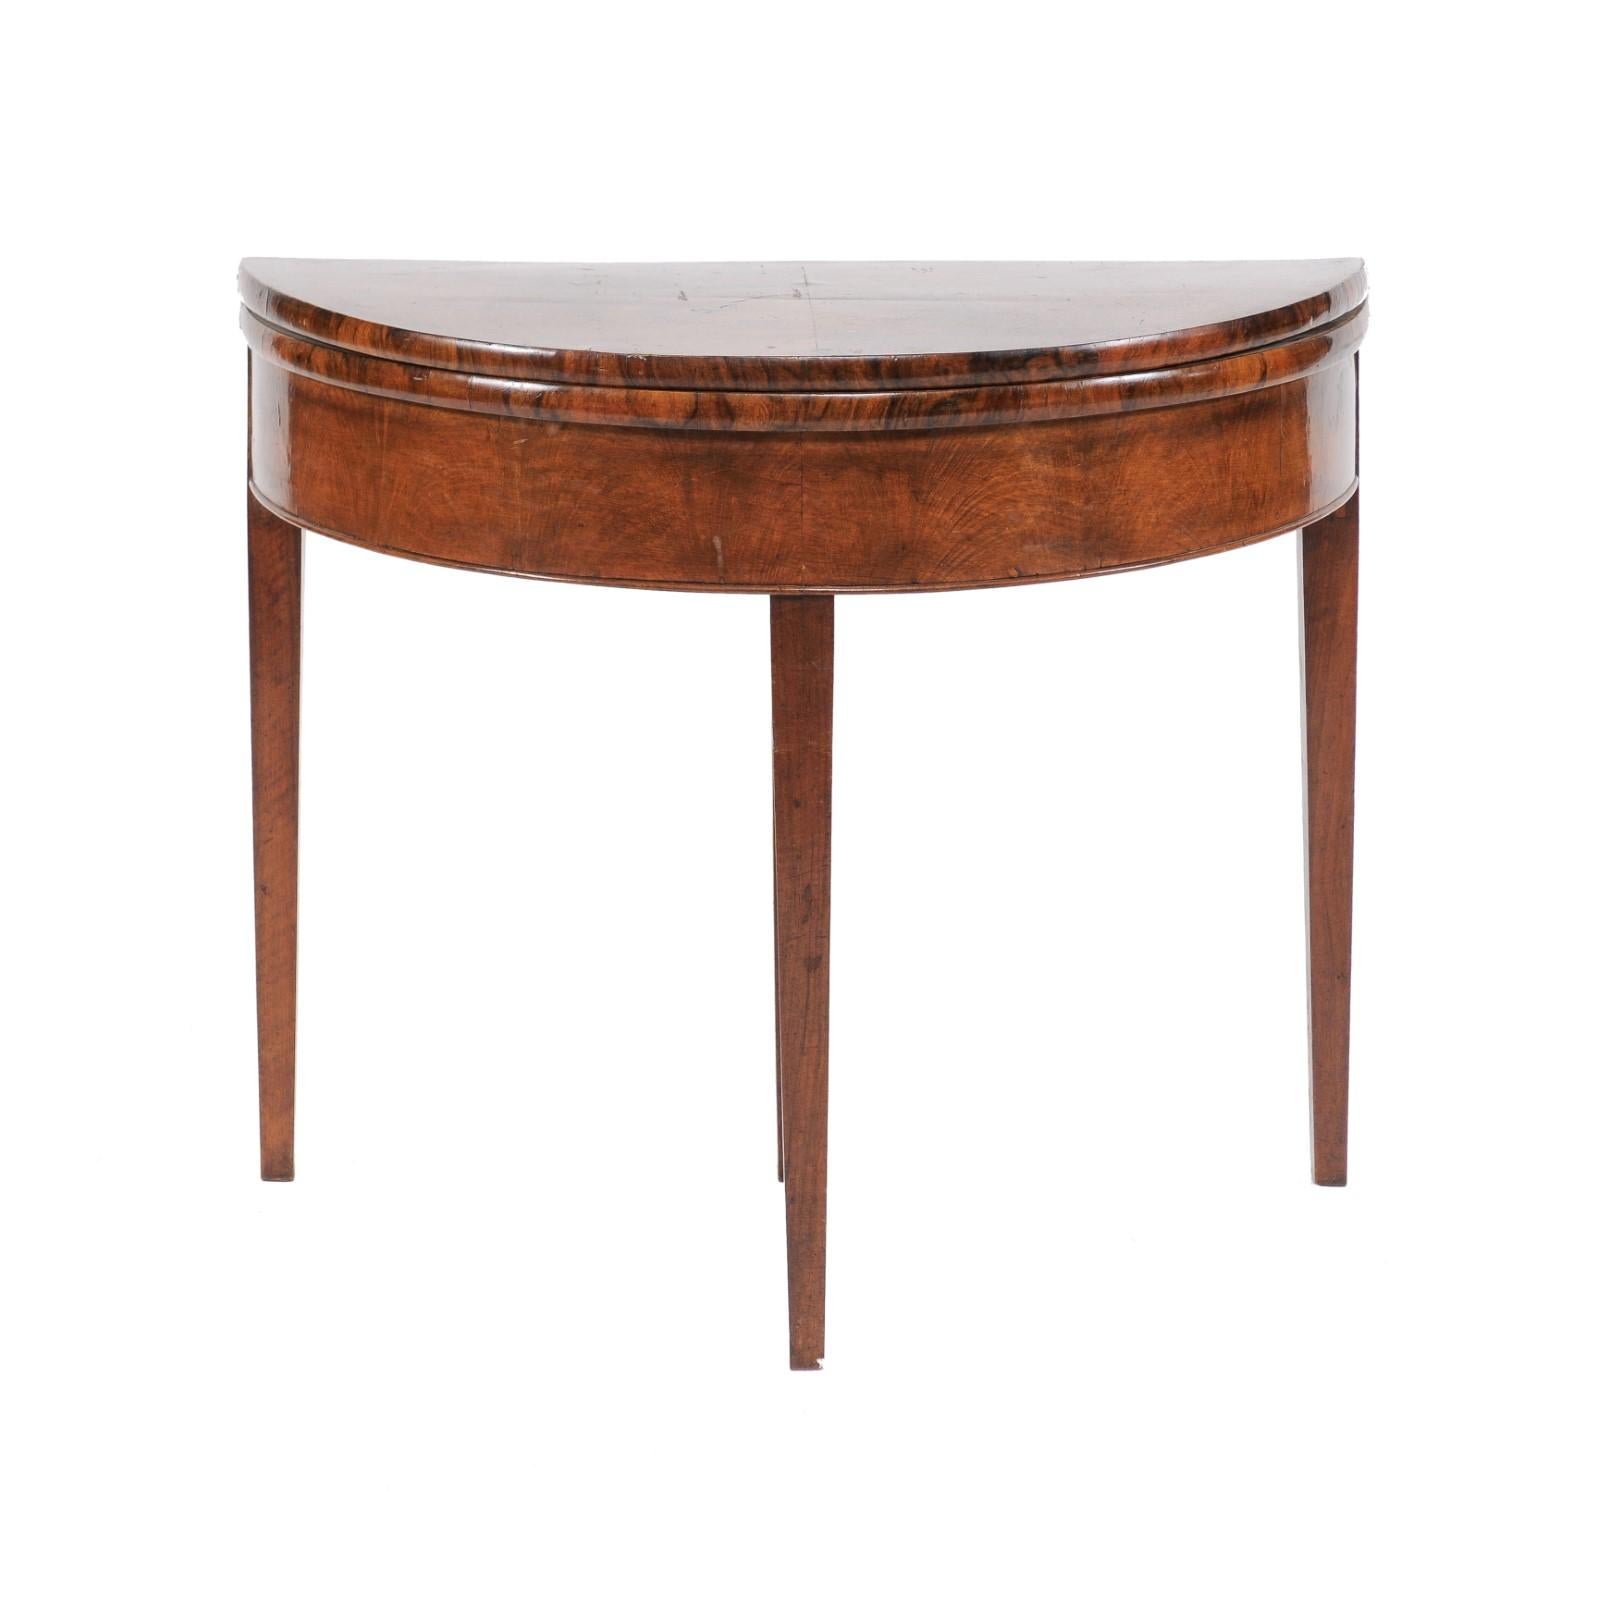 Directoire Style 1860s French Bookmarked Walnut Demilune Table with Leather Top